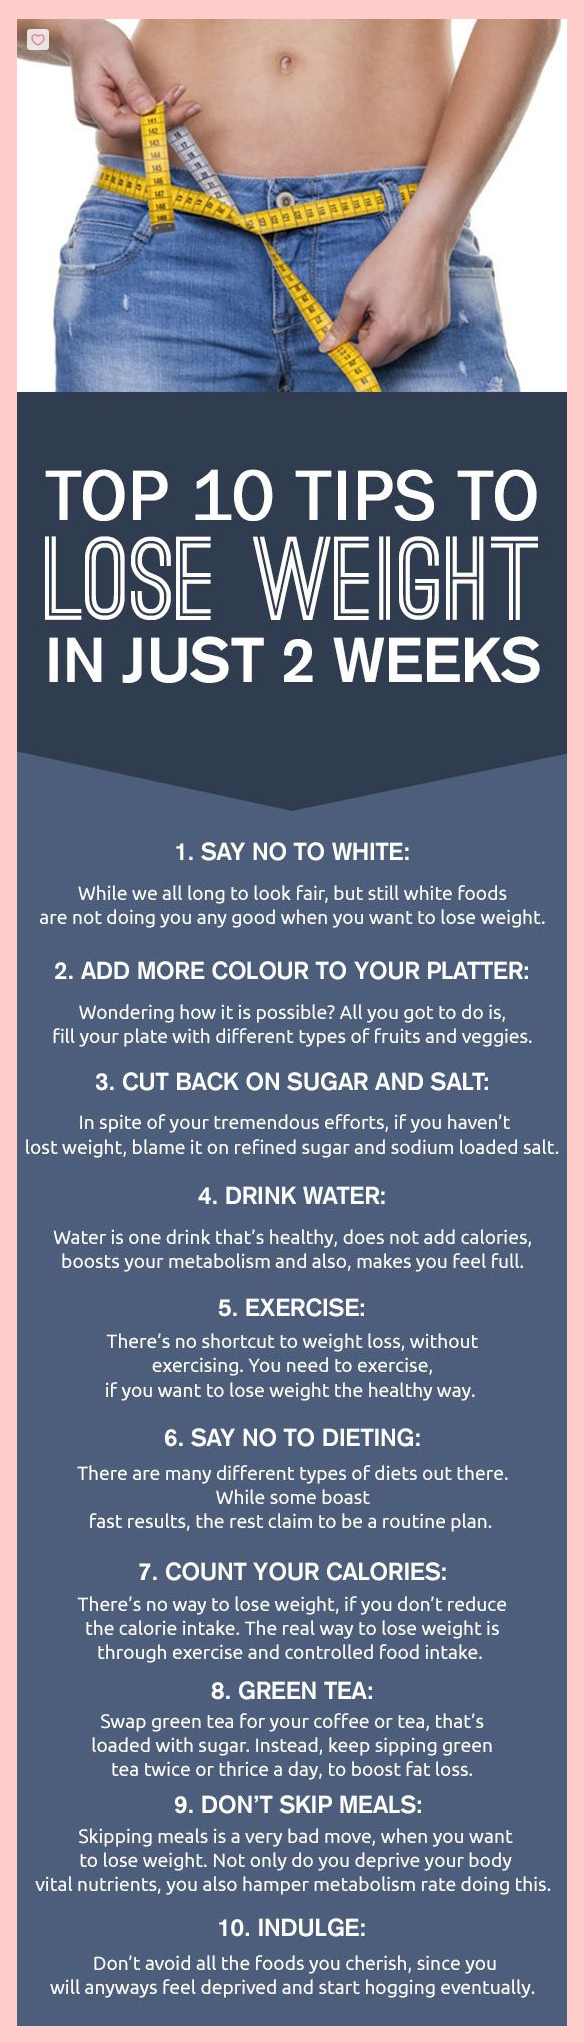 Top 10 tips to lose weight in just two weeks: Say no to white. Add more color. Cut back on sugar. Drink water. Exercise. Say no to dieting. Count your calories. Drink green tea. Don't skip meals. Indulge.